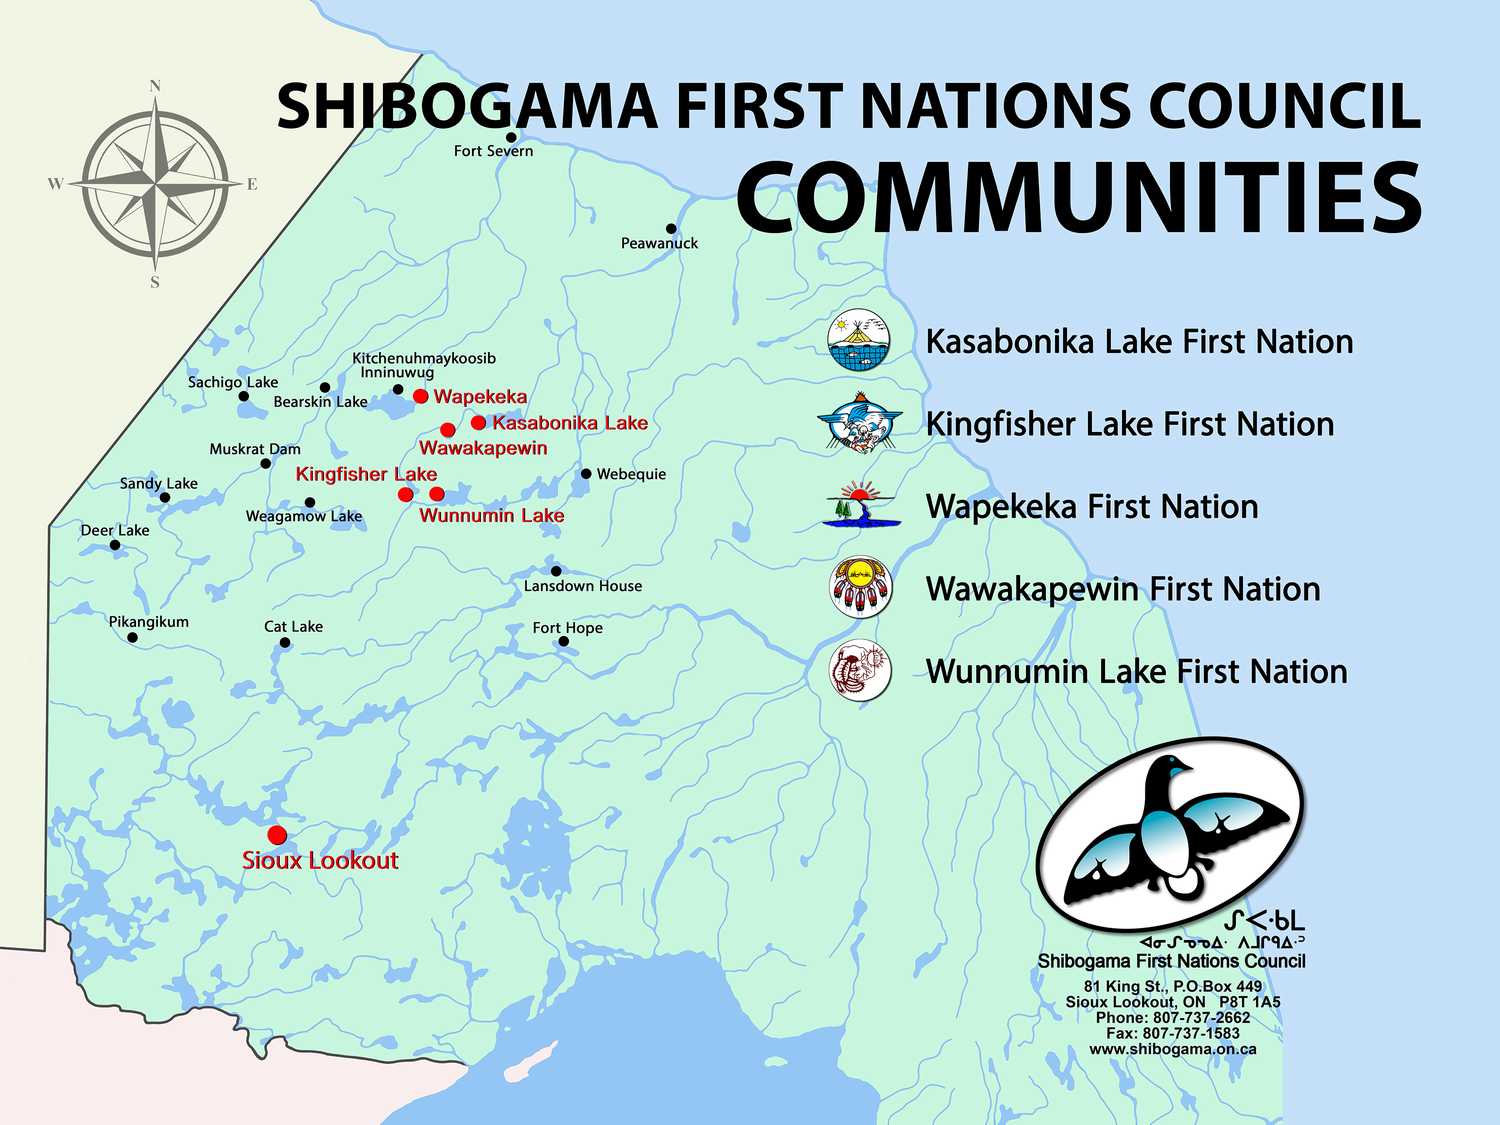 Map of the Shibogama First Nations Council Communities